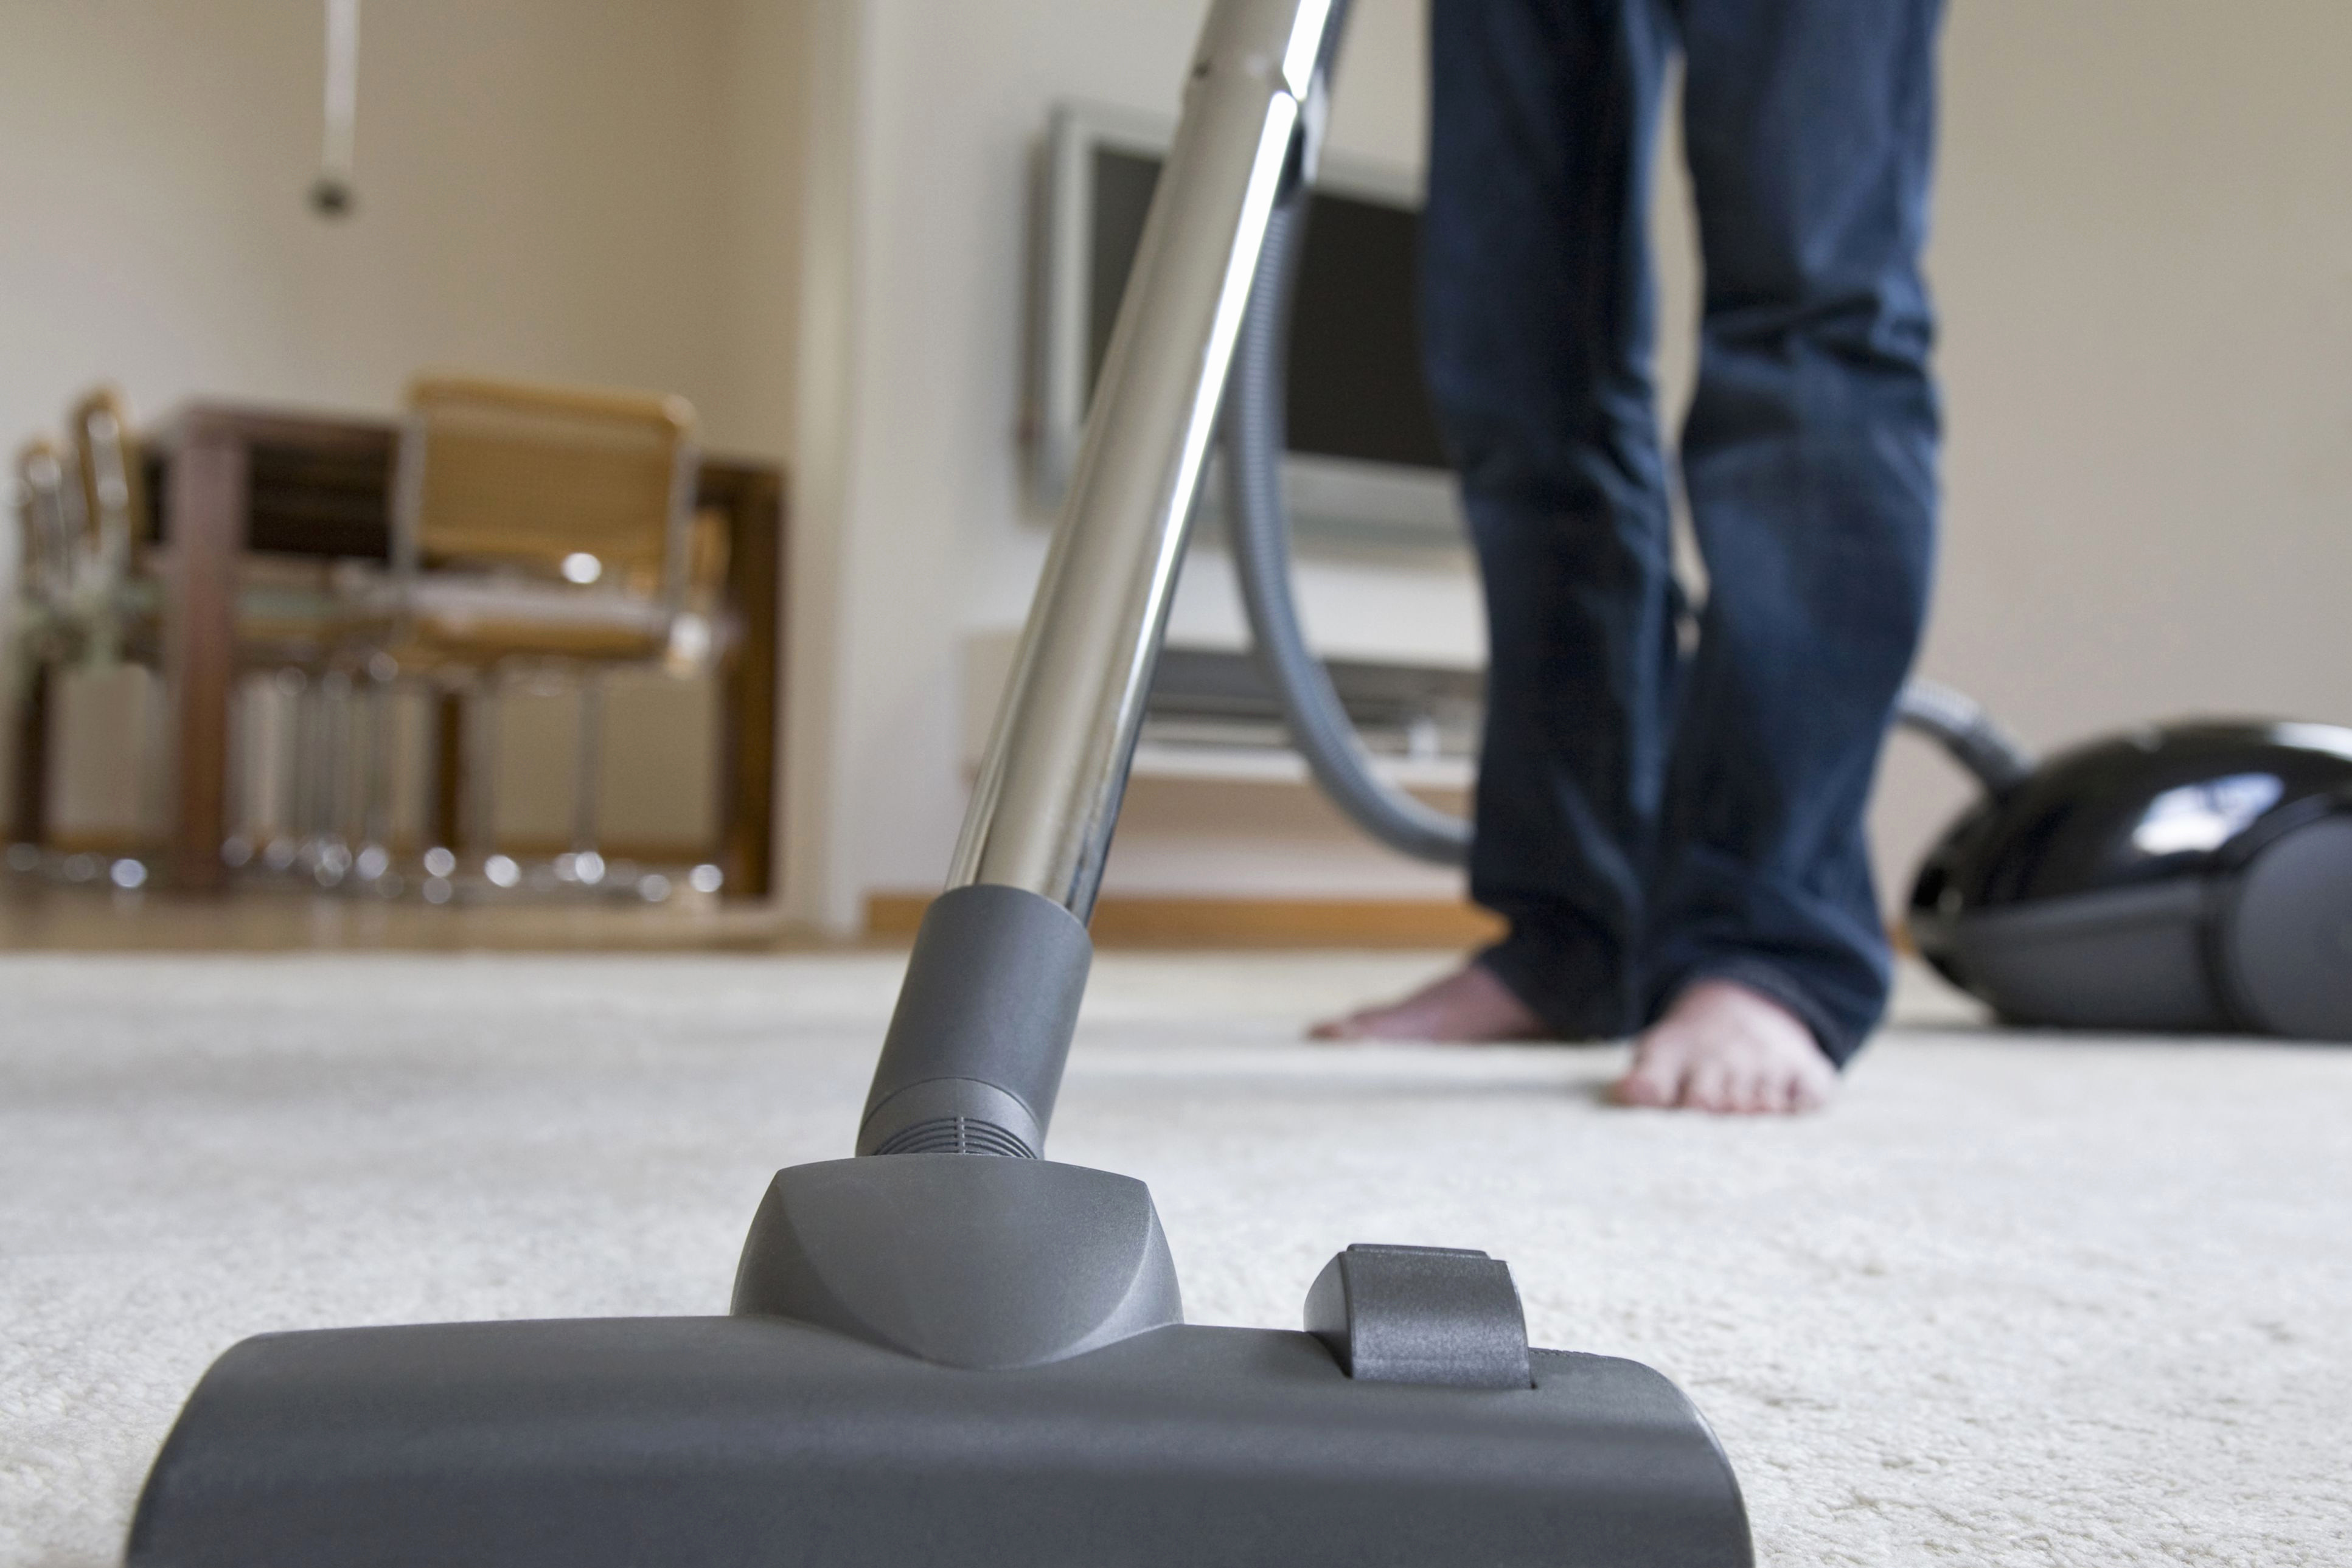 Hardwood Floor Repair fort Worth Tx Of Floor Wlcu In Best Vacuum for Hardwood Floors and Carpet Picture Of the Right Vacuum for Smartstrand and Other